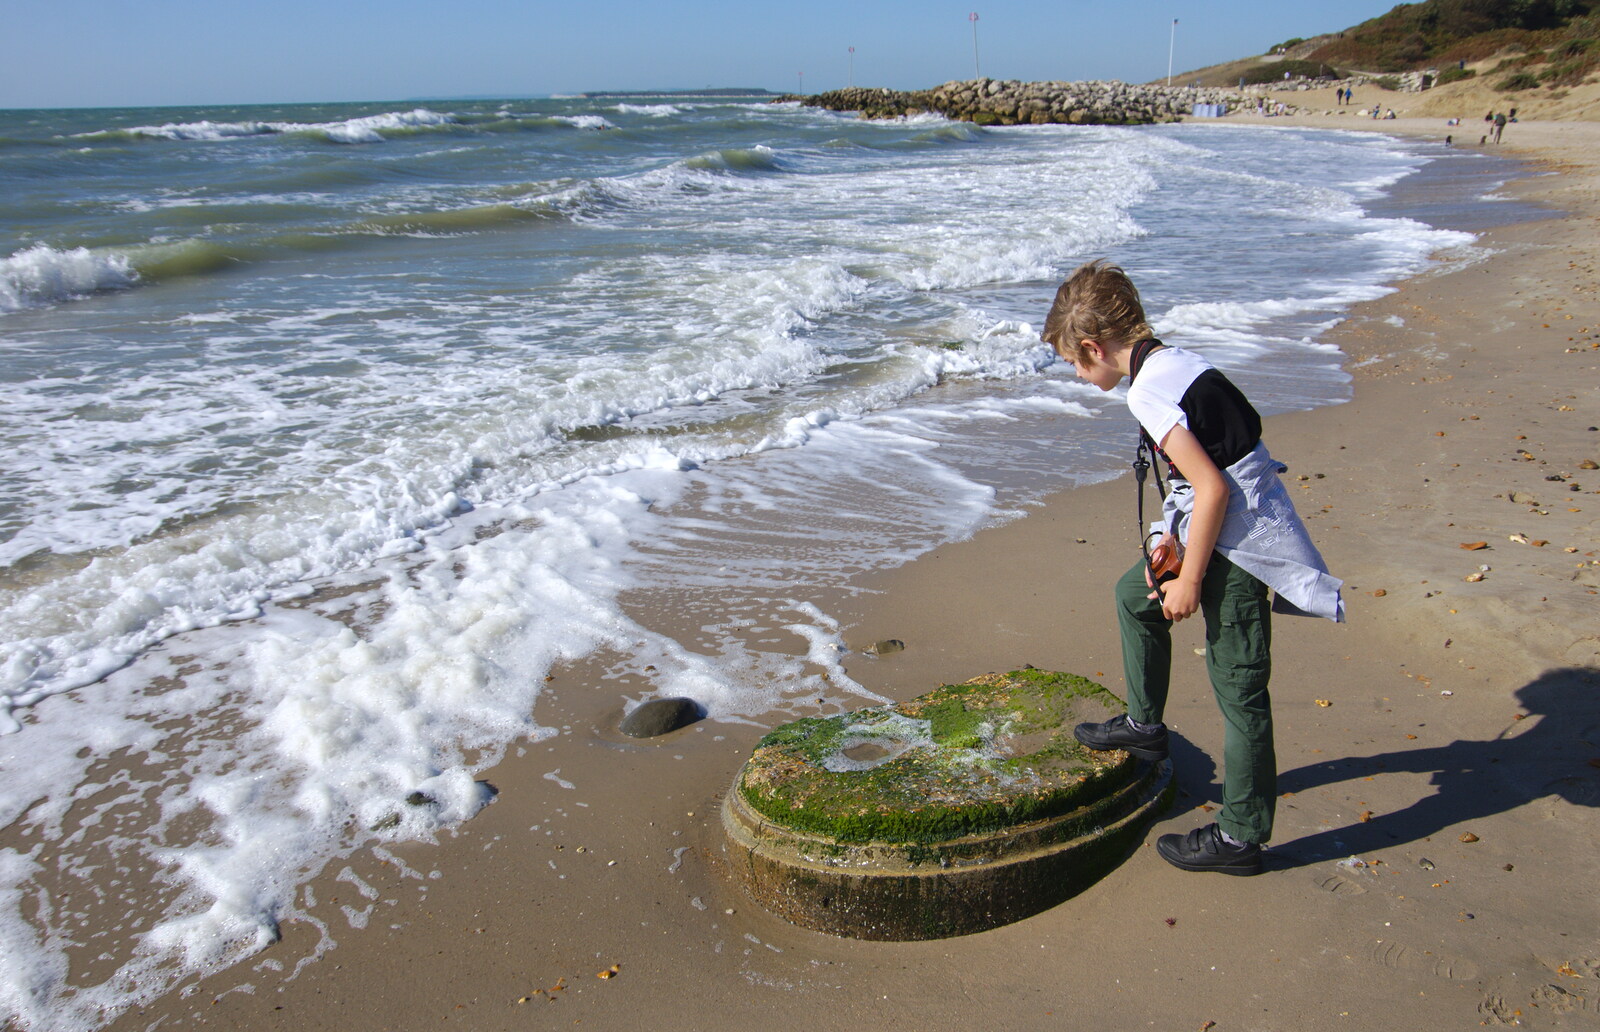 Fred stands on the remains of a concrete drain from A Trip to the South Coast, Highcliffe, Dorset - 20th September 2019